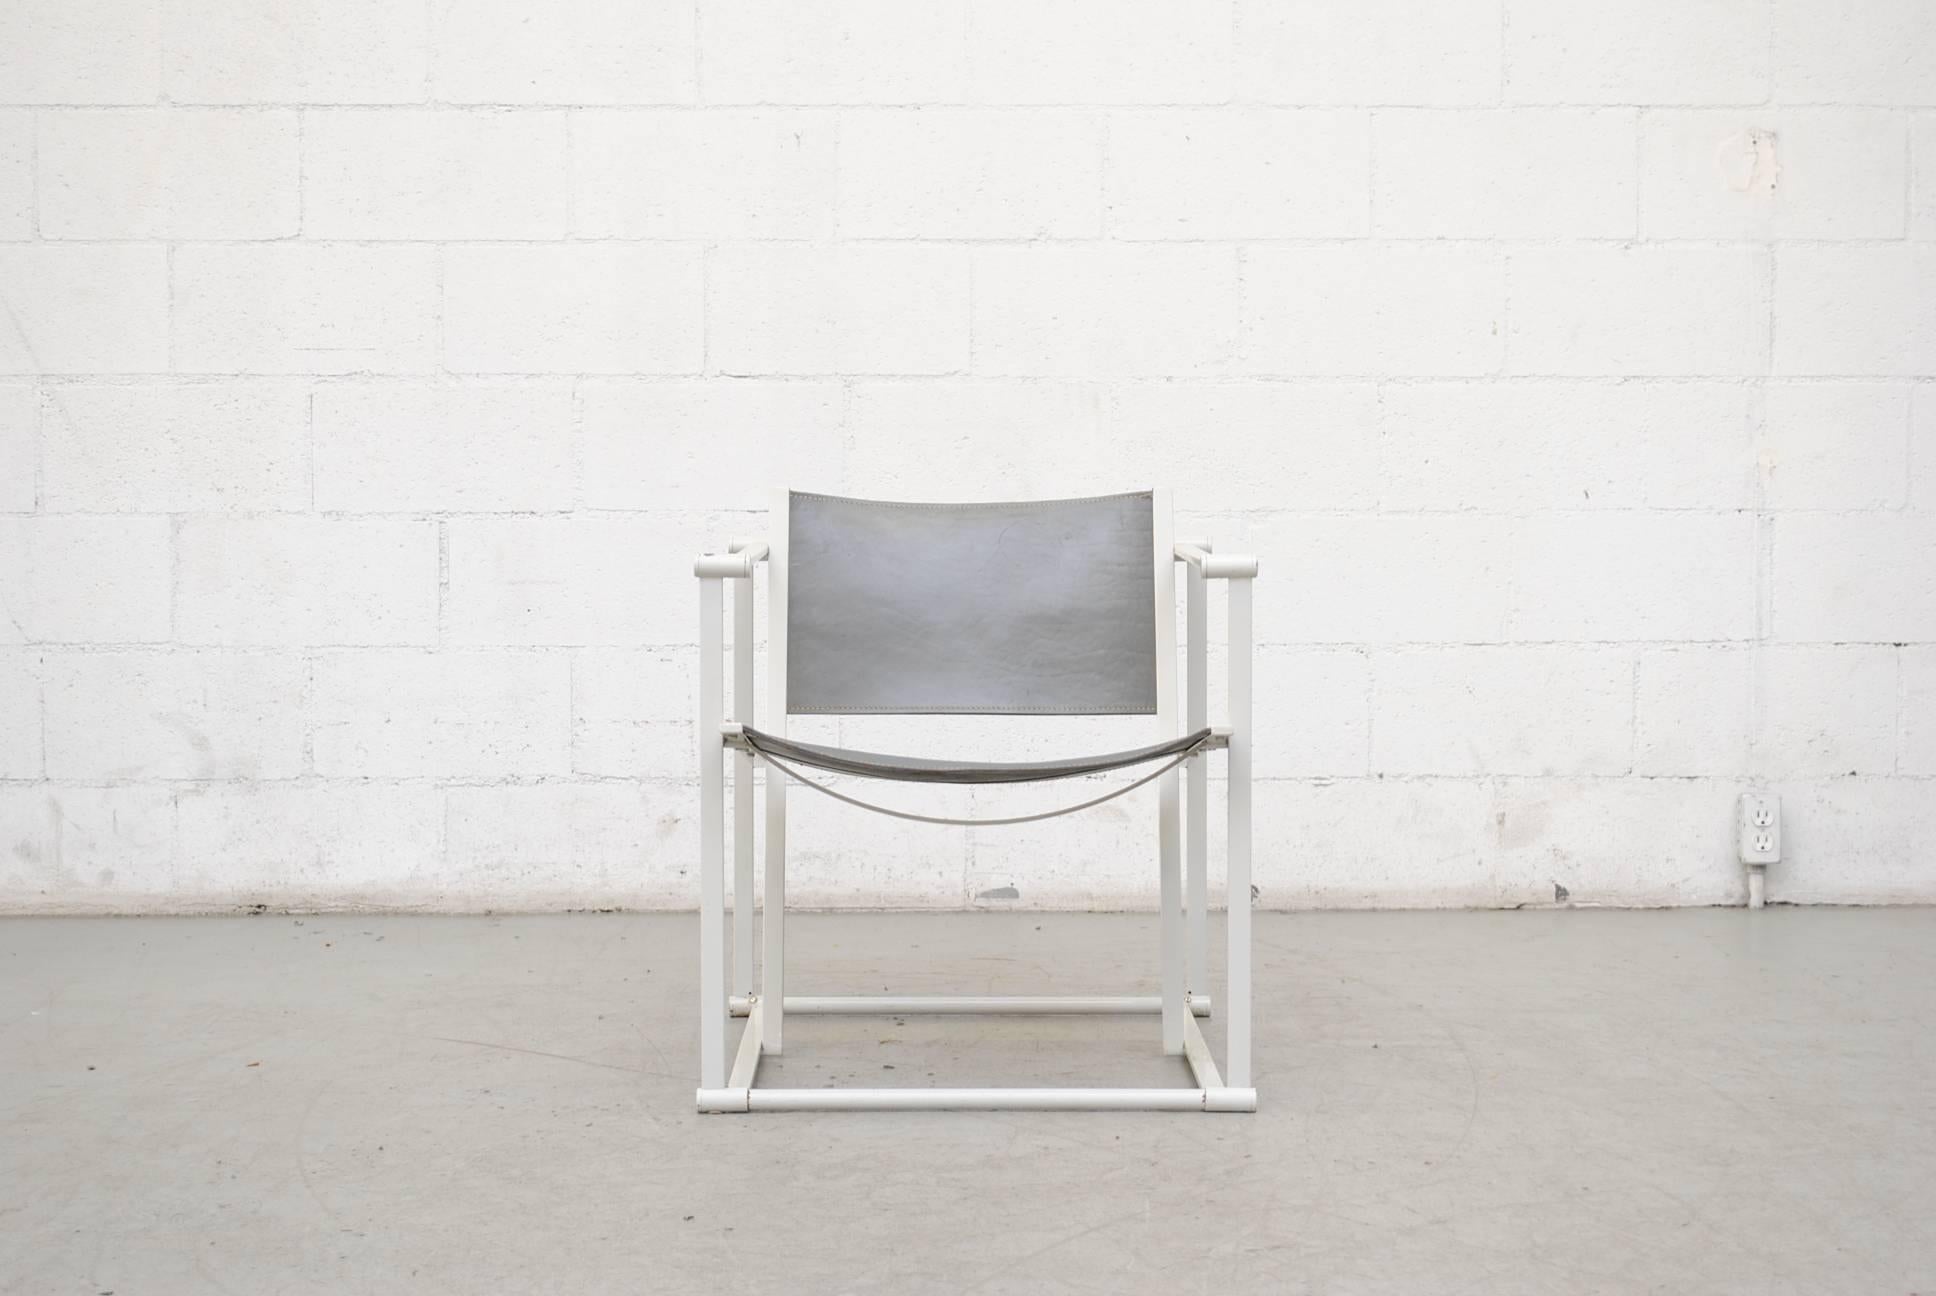 UMS Pastoe FM60, cubic lounge chair, designed in 1980 by Radboud van Beekum. Original white enameled steel cube frame with original grey leather seating. Both frames and seats are in original condition with visible wear. Set price.